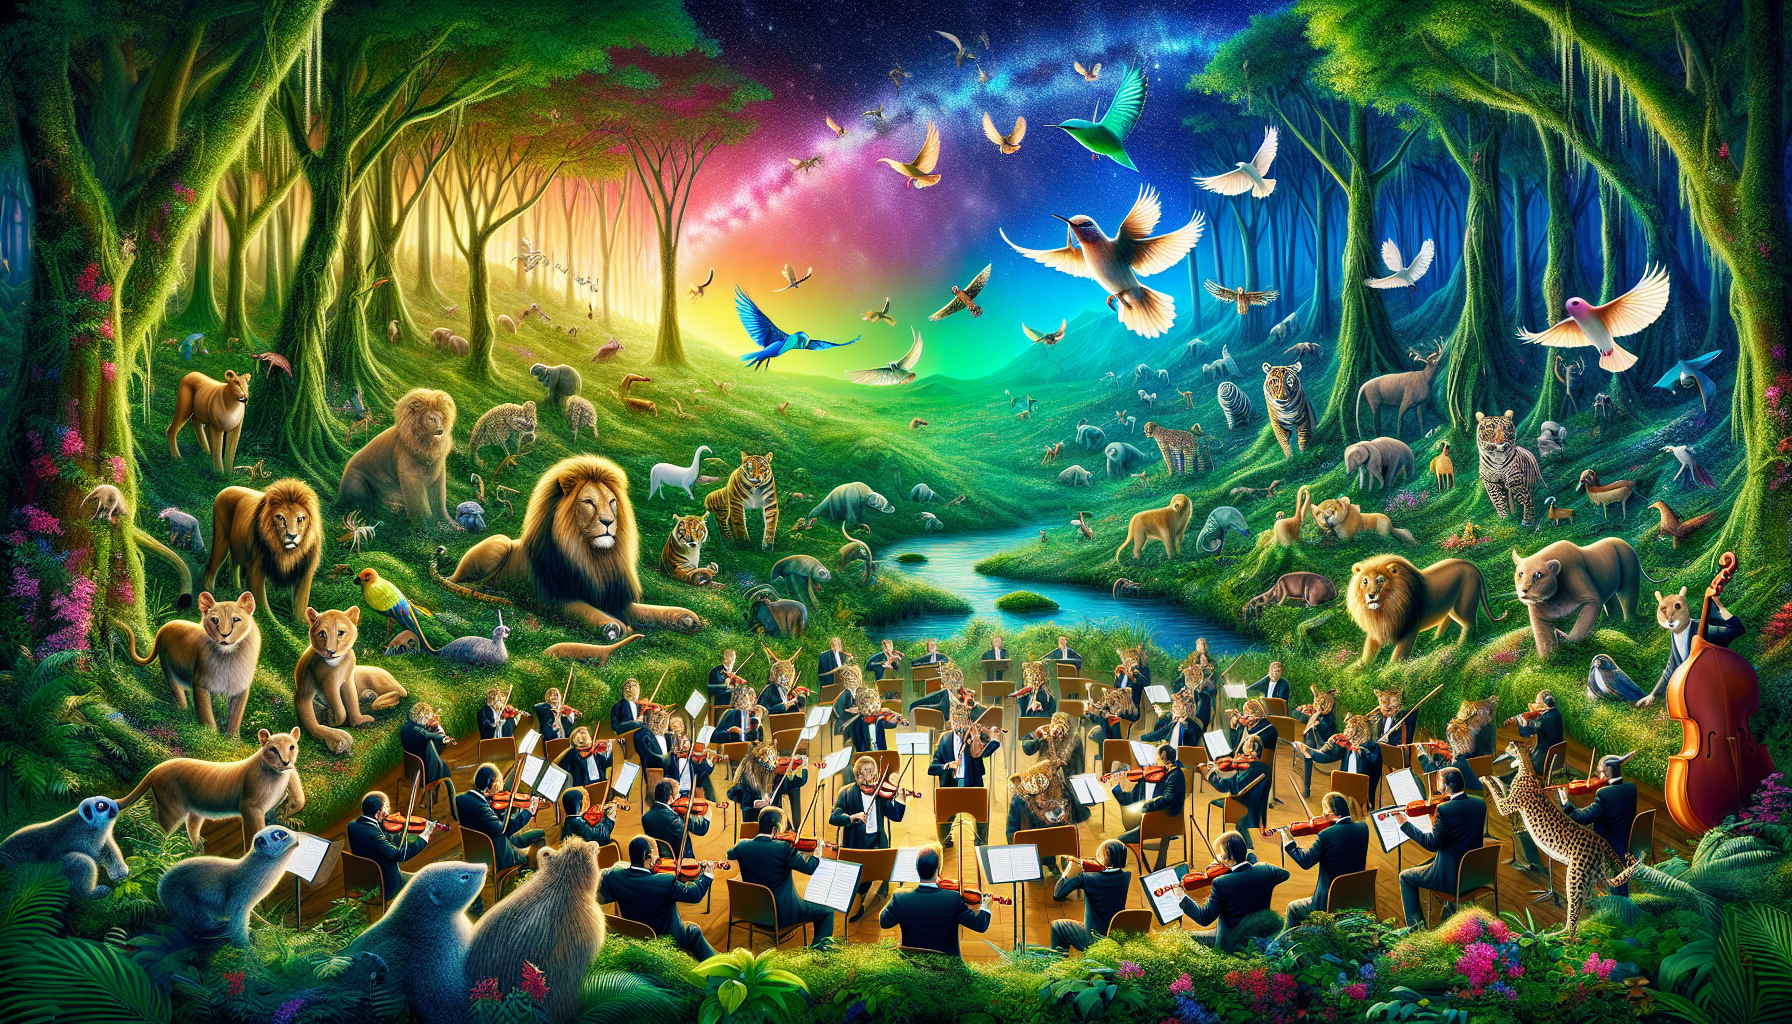 A grand orchestra positioned in the heart of a luscious, vibrant jungle, with a diverse array of animals - from majestic lions to tiny hummingbirds - intently listening and some gently participating,